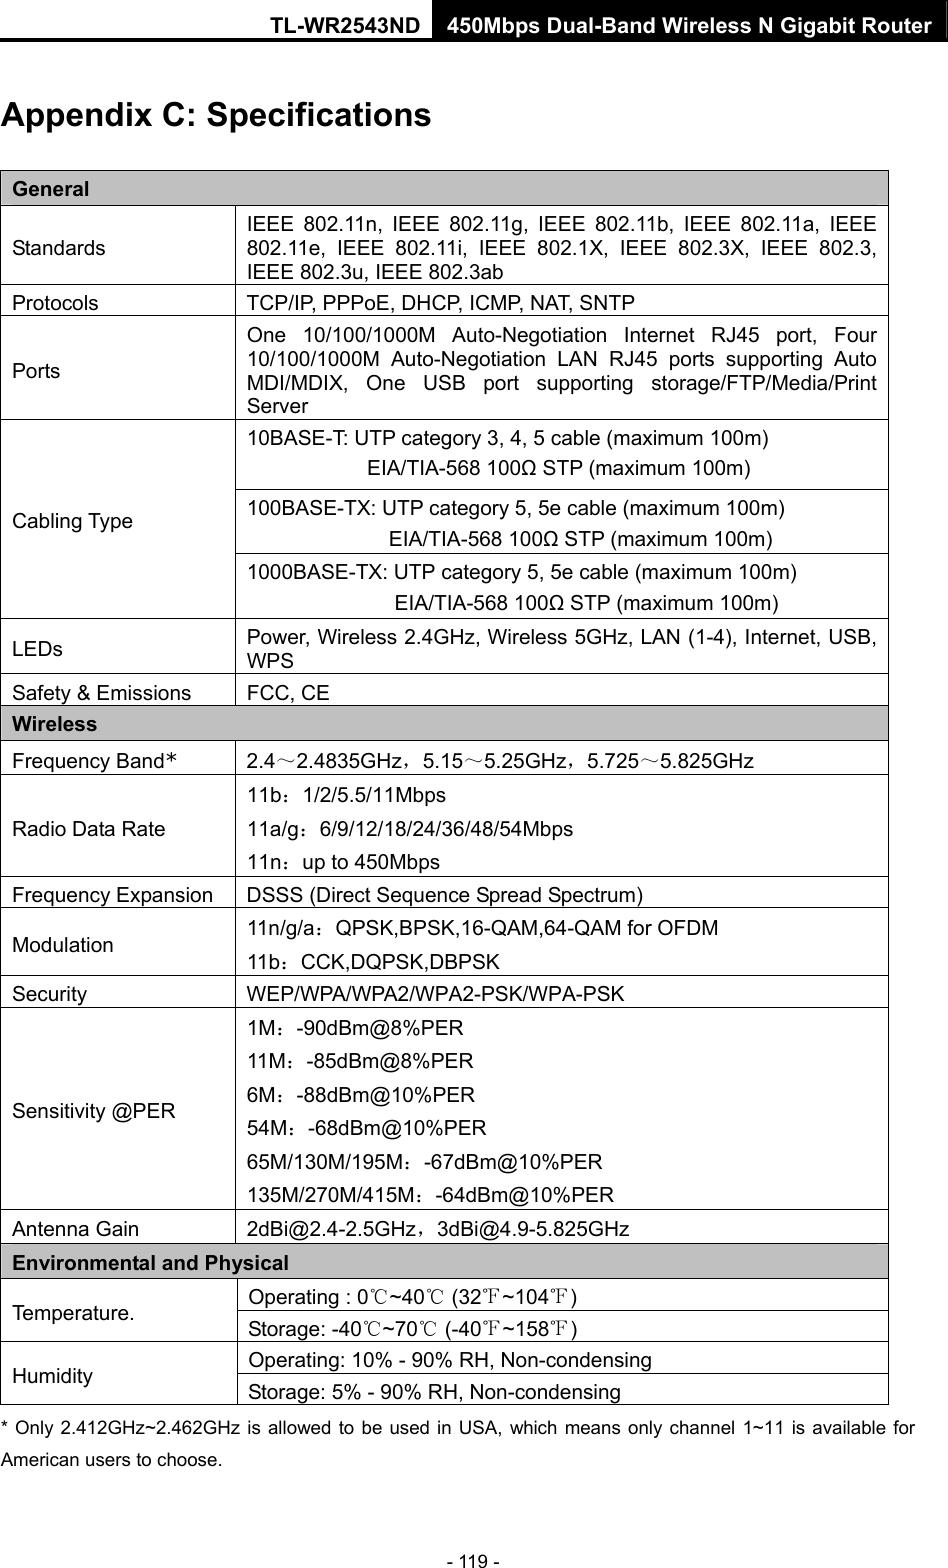 TL-WR2543ND 450Mbps Dual-Band Wireless N Gigabit Router - 119 - Appendix C: Specifications General Standards IEEE 802.11n, IEEE 802.11g, IEEE 802.11b, IEEE 802.11a, IEEE 802.11e, IEEE 802.11i, IEEE 802.1X, IEEE 802.3X, IEEE 802.3, IEEE 802.3u, IEEE 802.3ab Protocols  TCP/IP, PPPoE, DHCP, ICMP, NAT, SNTP Ports One 10/100/1000M Auto-Negotiation Internet RJ45 port, Four 10/100/1000M Auto-Negotiation LAN RJ45 ports supporting Auto MDI/MDIX, One USB port supporting storage/FTP/Media/Print Server 10BASE-T: UTP category 3, 4, 5 cable (maximum 100m) EIA/TIA-568 100Ω STP (maximum 100m) 100BASE-TX: UTP category 5, 5e cable (maximum 100m) EIA/TIA-568 100Ω STP (maximum 100m) Cabling Type 1000BASE-TX: UTP category 5, 5e cable (maximum 100m) EIA/TIA-568 100Ω STP (maximum 100m) LEDs  Power, Wireless 2.4GHz, Wireless 5GHz, LAN (1-4), Internet, USB, WPS Safety &amp; Emissions  FCC, CE Wireless Frequency Band* 2.4～2.4835GHz，5.15～5.25GHz，5.725～5.825GHz Radio Data Rate 11b：1/2/5.5/11Mbps 11a/g：6/9/12/18/24/36/48/54Mbps 11n：up to 450Mbps Frequency Expansion  DSSS (Direct Sequence Spread Spectrum) Modulation  11n/g/a：QPSK,BPSK,16-QAM,64-QAM for OFDM 11b：CCK,DQPSK,DBPSK Security WEP/WPA/WPA2/WPA2-PSK/WPA-PSK Sensitivity @PER 1M：-90dBm@8%PER 11M：-85dBm@8%PER 6M：-88dBm@10%PER 54M：-68dBm@10%PER 65M/130M/195M：-67dBm@10%PER 135M/270M/415M：-64dBm@10%PER Antenna Gain  2dBi@2.4-2.5GHz，3dBi@4.9-5.825GHz Environmental and Physical Operating : 0℃~40℃ (32 ~104℉℉) Temperature.  Storage: -40℃~70℃ (-40℉~158℉) Operating: 10% - 90% RH, Non-condensing Humidity  Storage: 5% - 90% RH, Non-condensing * Only 2.412GHz~2.462GHz is allowed to be used in USA, which means only channel 1~11 is available for American users to choose. 